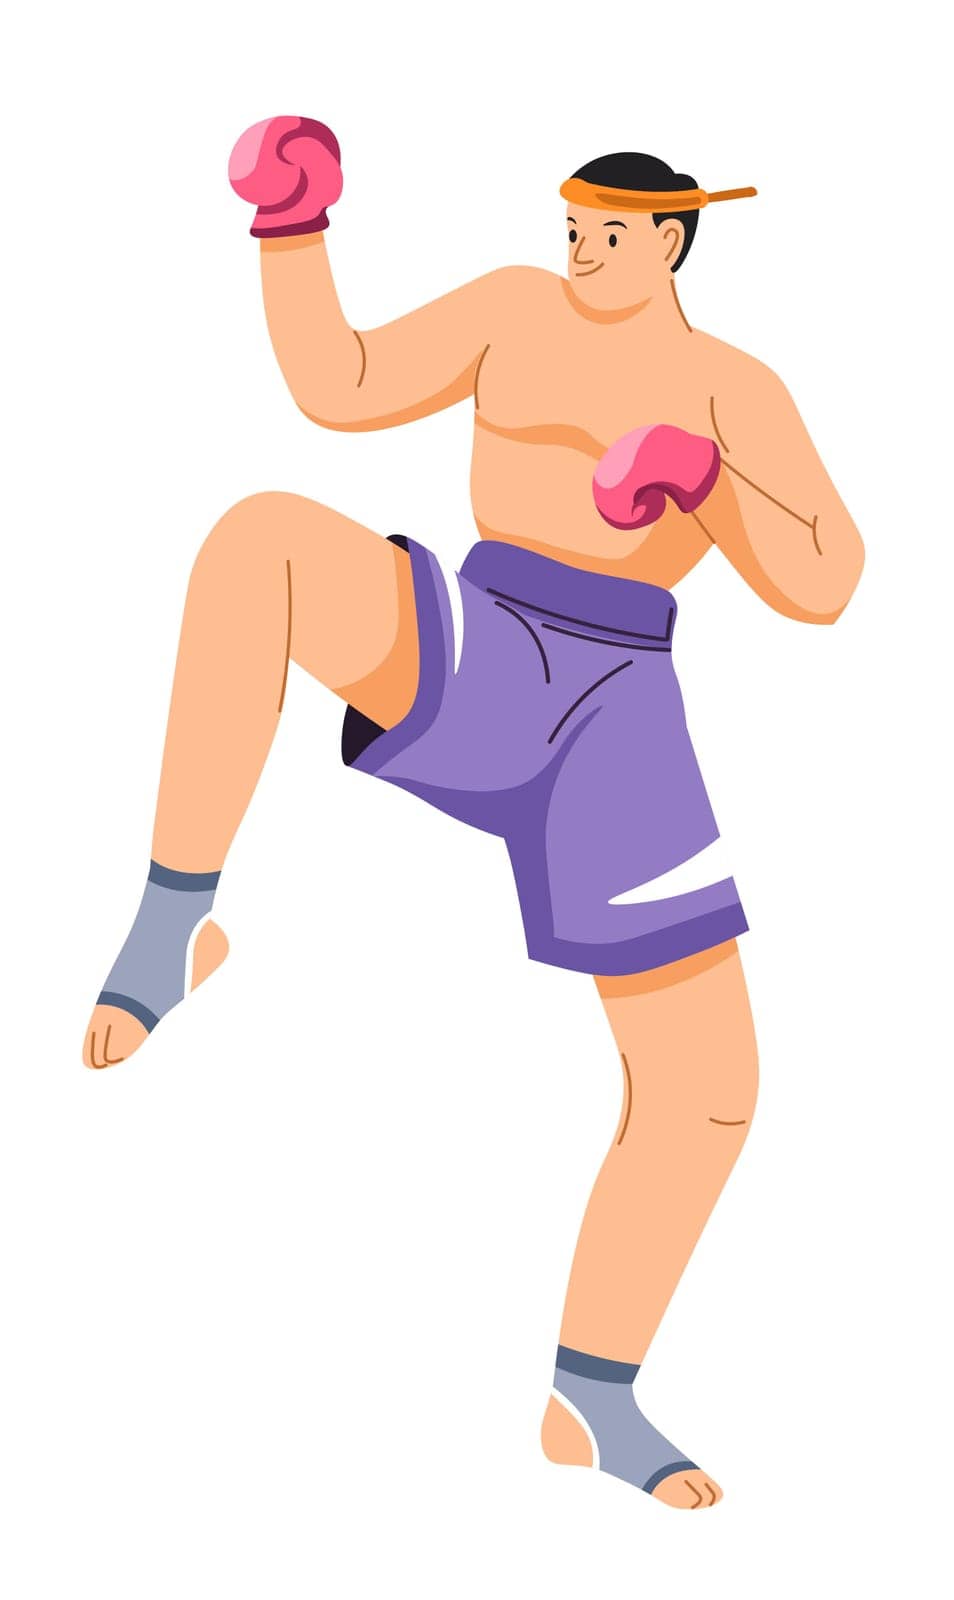 Thai boxer or fighter in uniform, sports activity by Sonulkaster